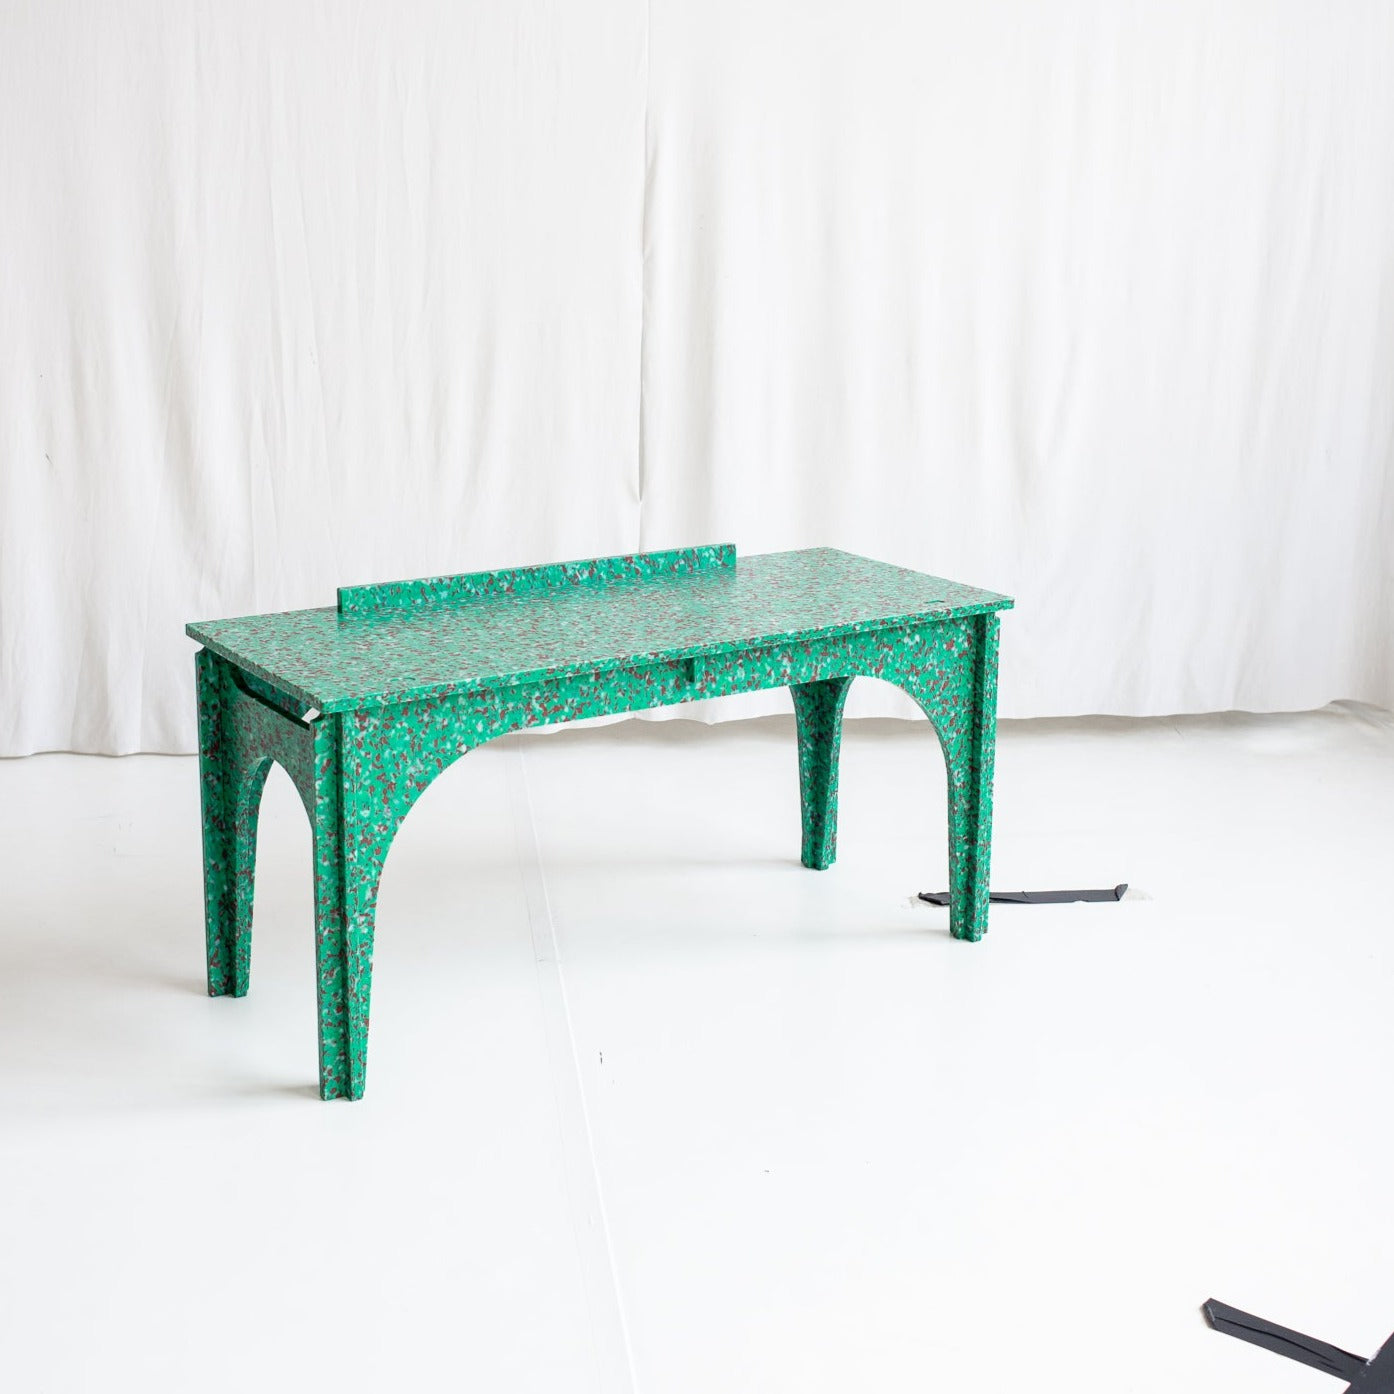 GREEN BENCH KIDS DESK BY THE MINIMONO PROJECT - BRAND FOR ECO FRIENDLY - PLAYFUL - MULTI FUNCTIONAL - SUSTAINABLE - HIGH QUALITY - DESIGN FURNITURE FROM RECYCLED PLASTIC FOR BOTH ADULT AND CHILDREN MADE IN BERLIN GERMANY